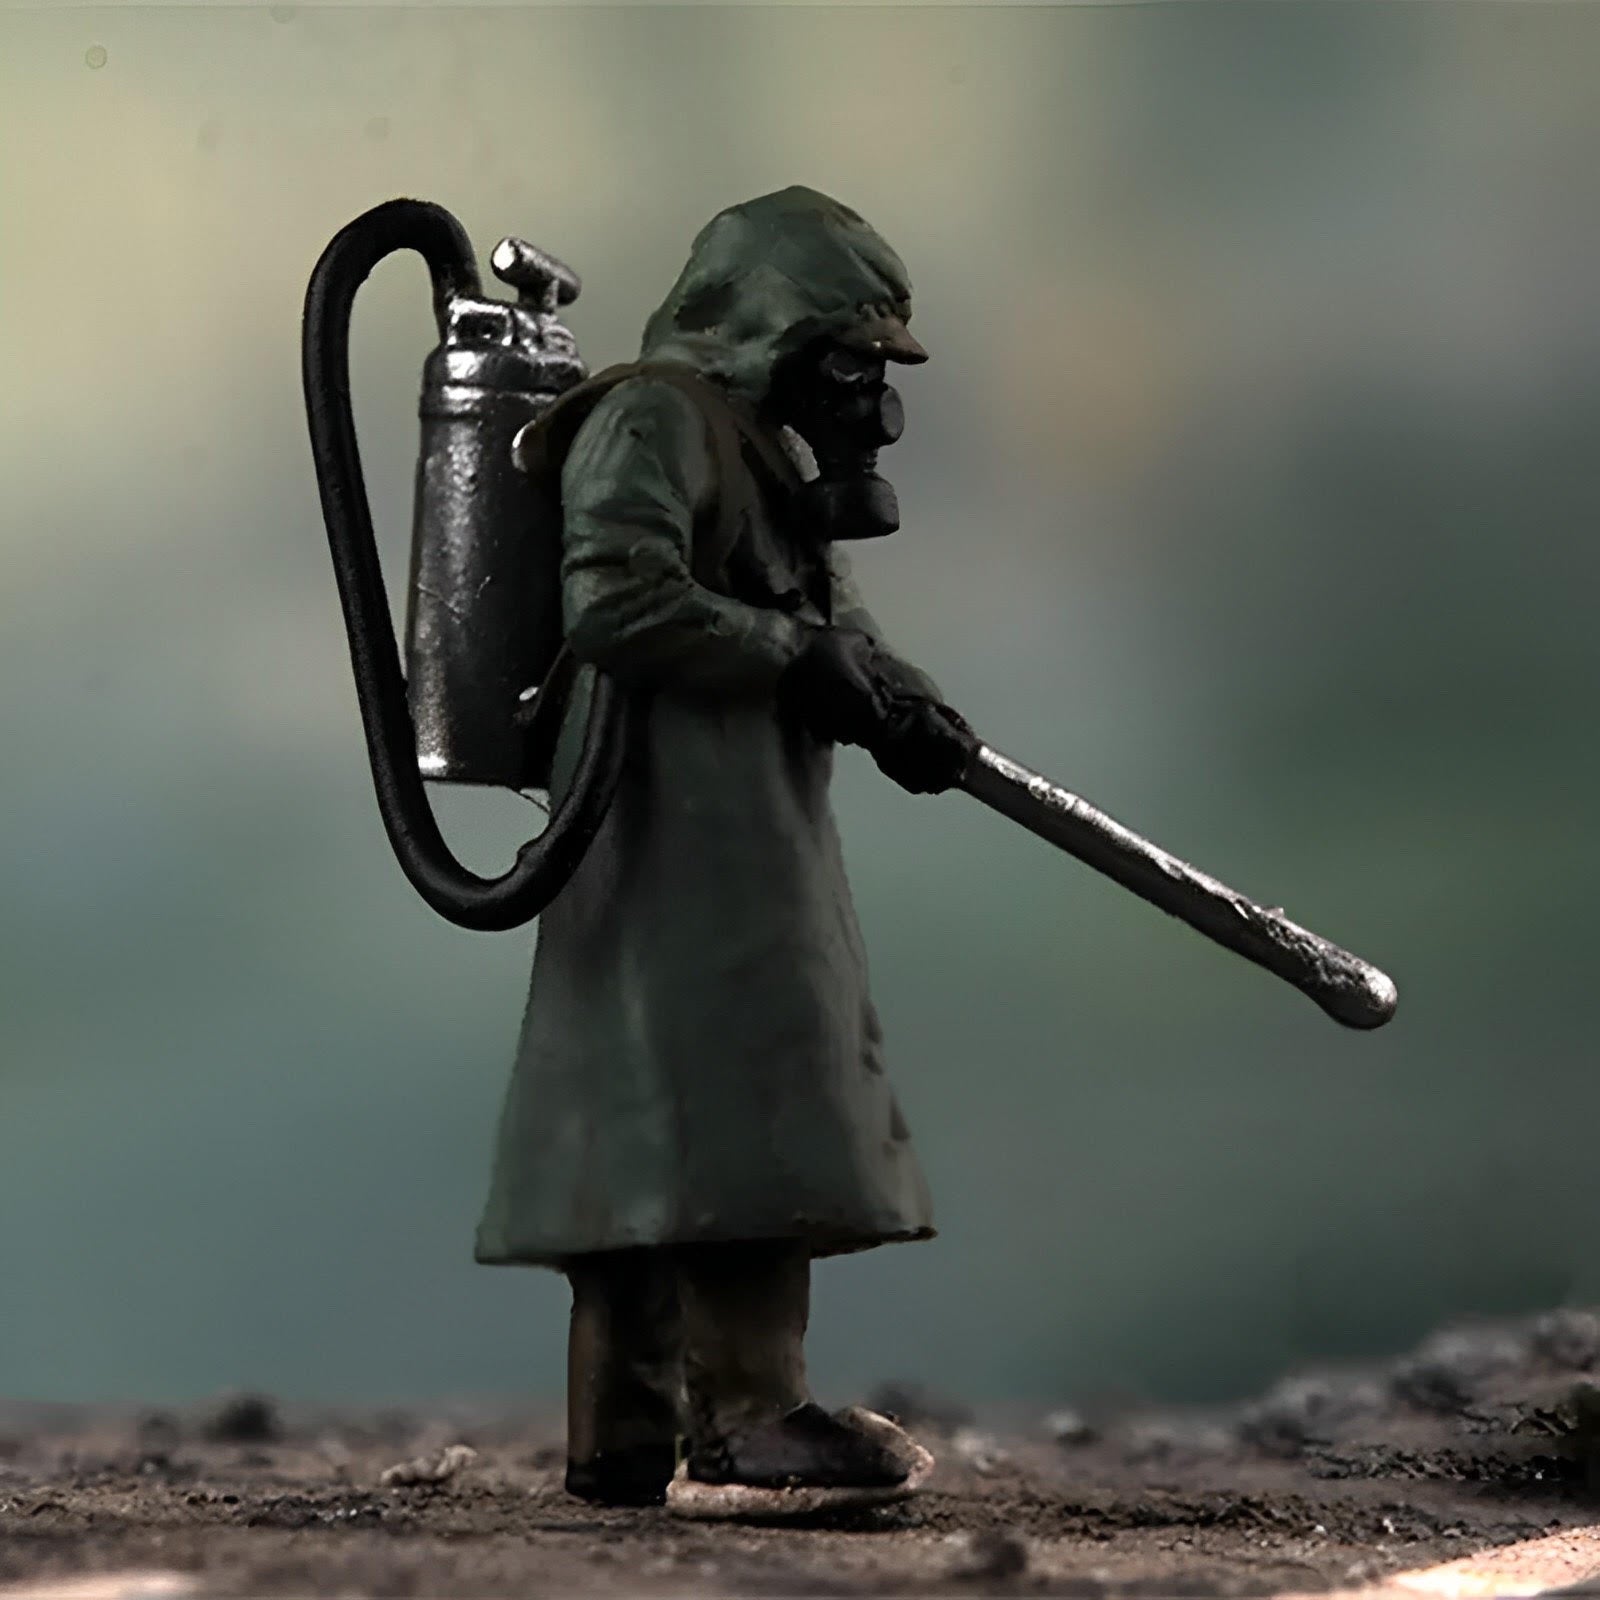 1/72 Scale Chernobyl Biochemical Soldier Figure